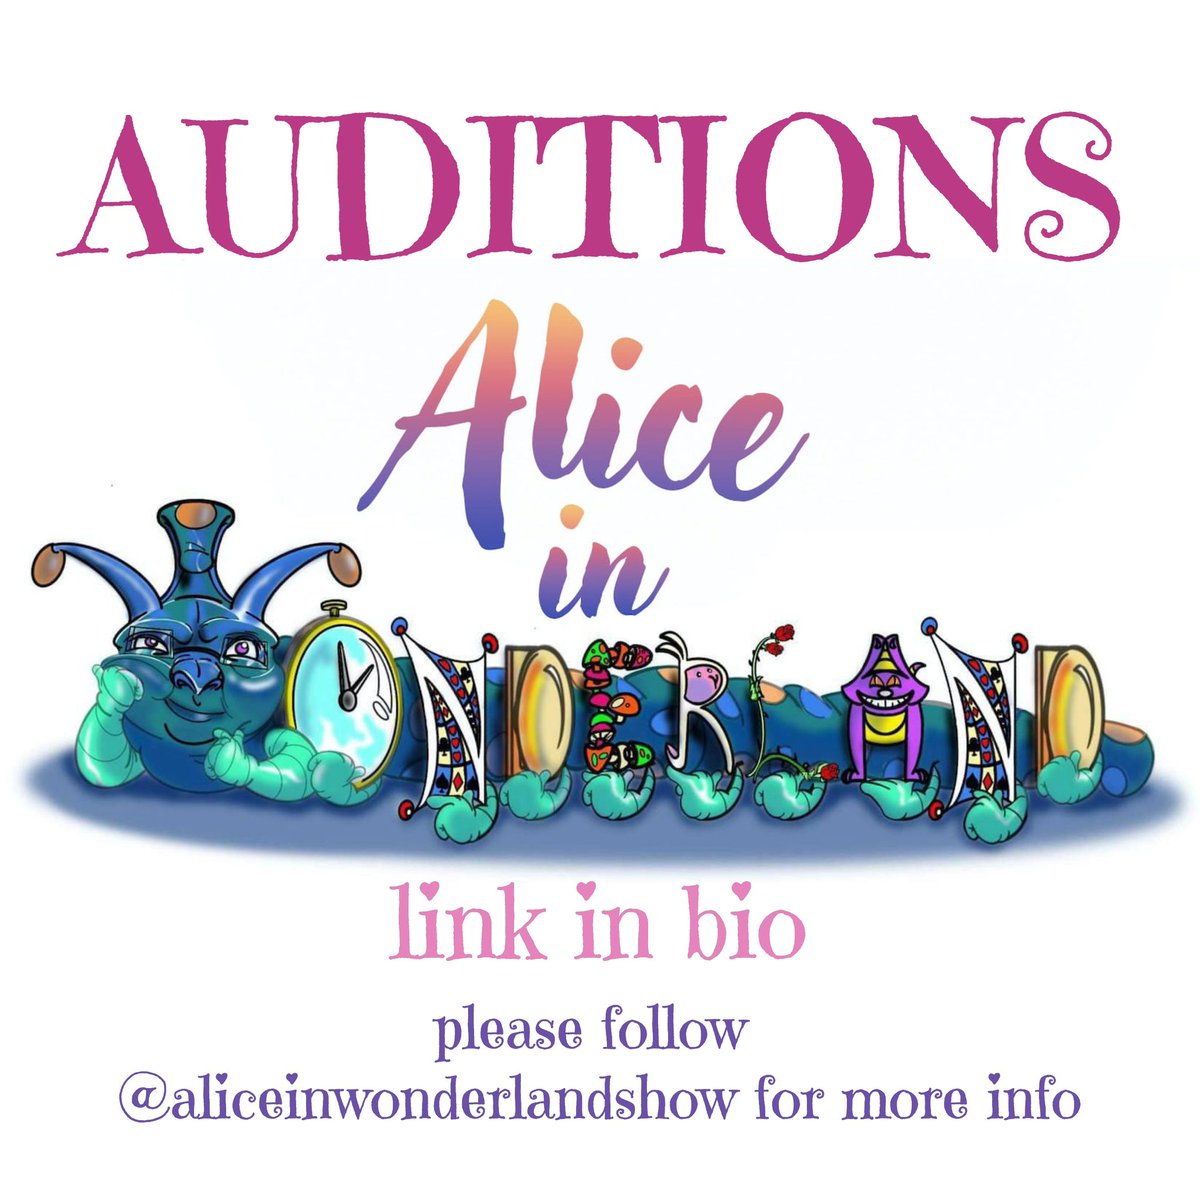 Auditions for a new musical/opera! Info at: trialrunproductions.com/alice #auditions #opera #musicals #operasingers #musicaltheatre #musicaltheater #newmusicals #newopera #musicalauditions